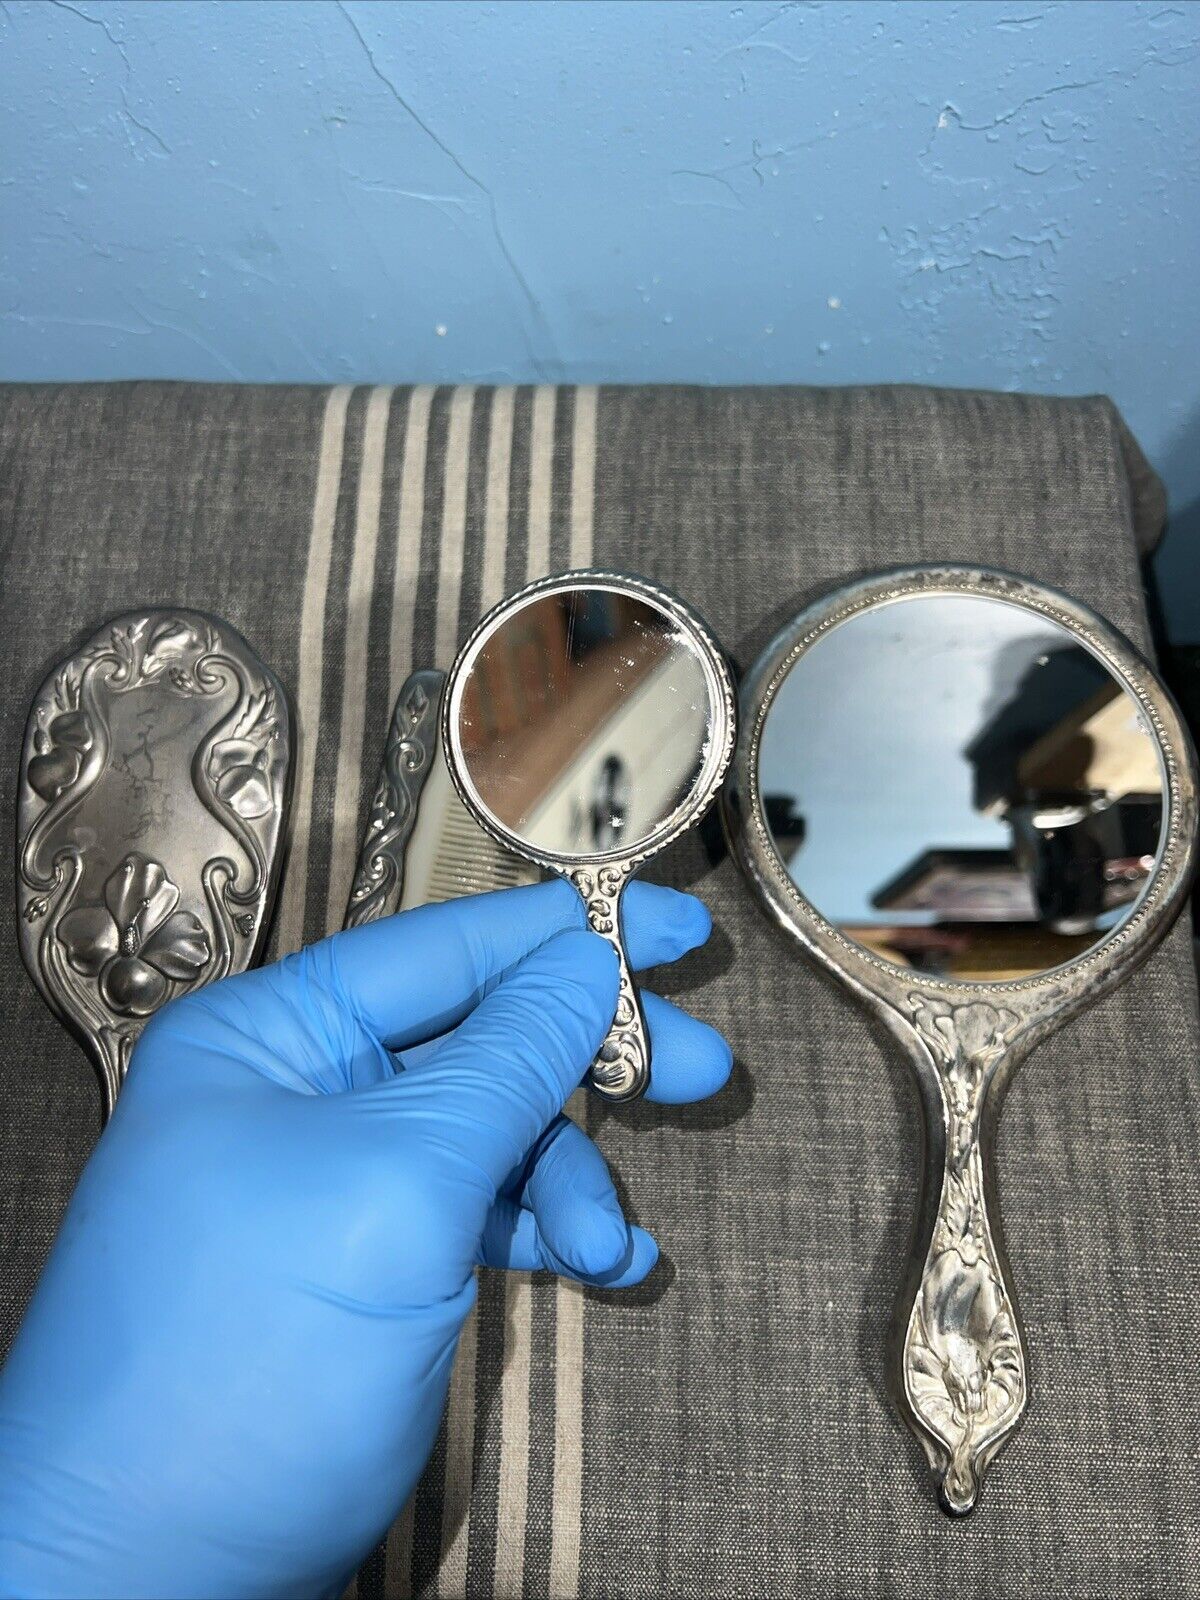 Heavy Vintage Antique Silver Plated Ornate Vanity Hand-Held Mirror and Brush